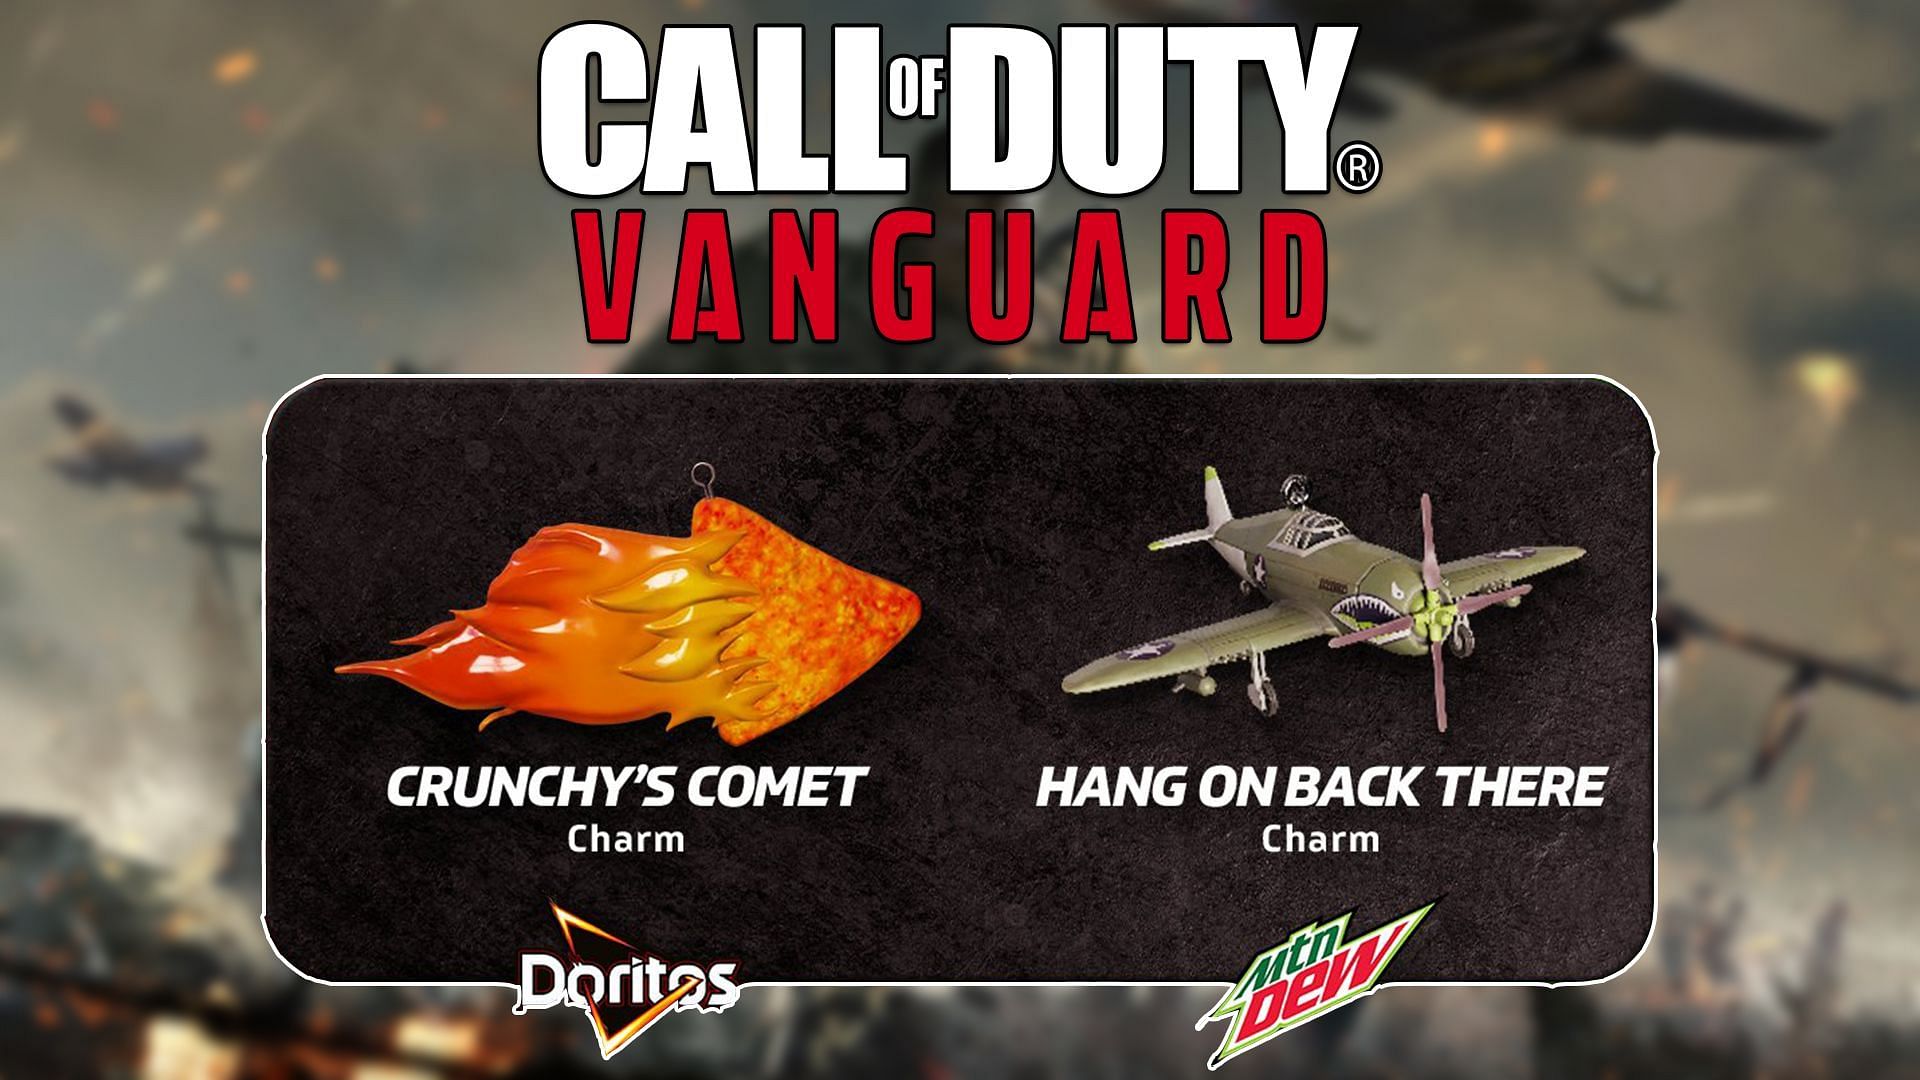 Crunchy&rsquo;s Comet and Hang On Back There charms in Call of Duty Vanguard (Image via Sportskeeda)